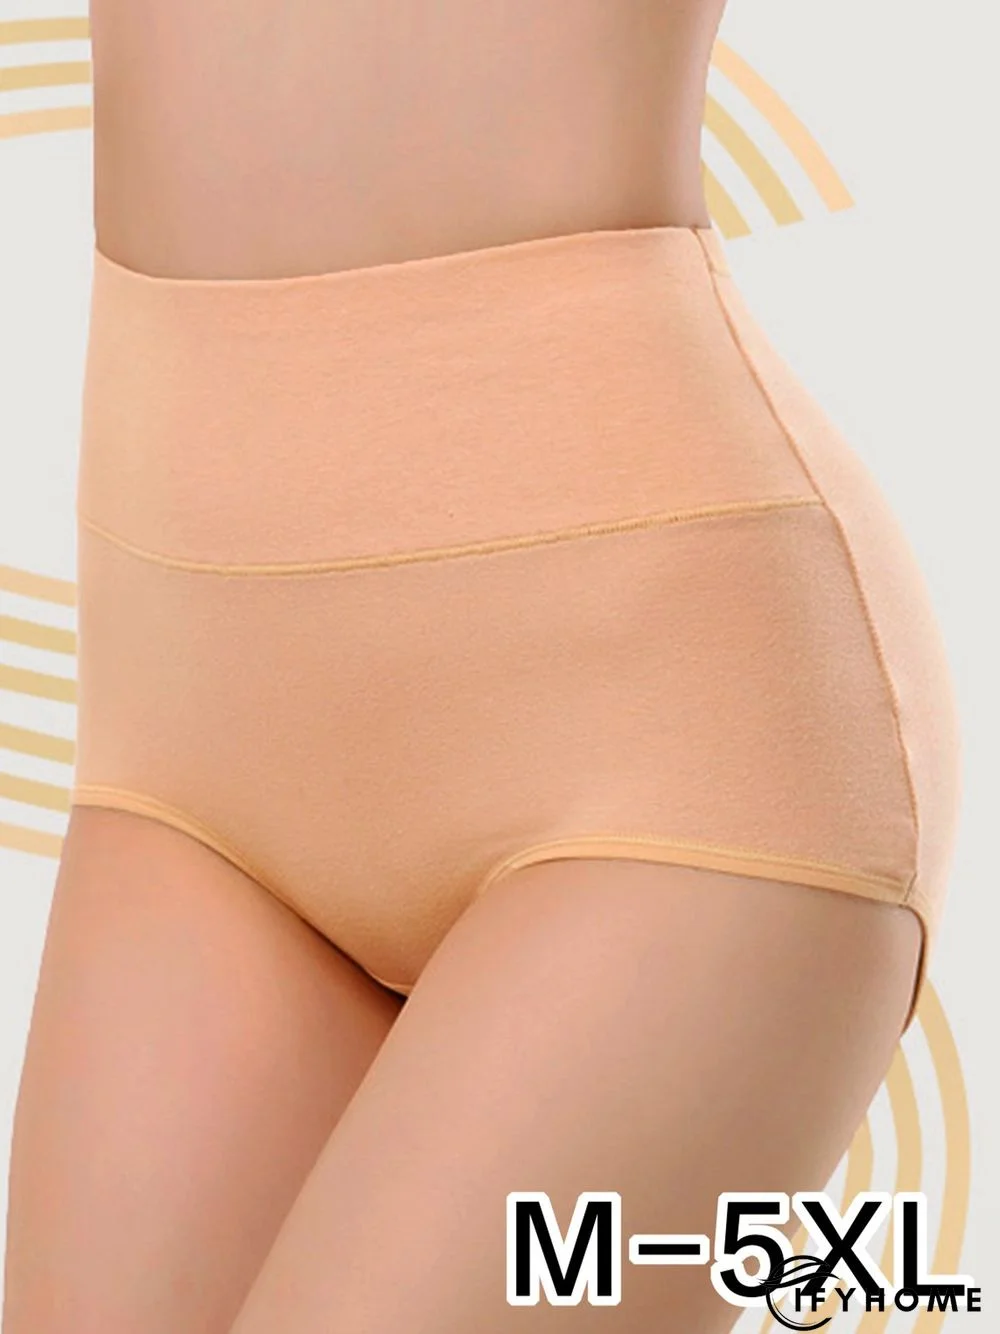 Cotton Breathable High Waist Briefs Plus Size | IFYHOME